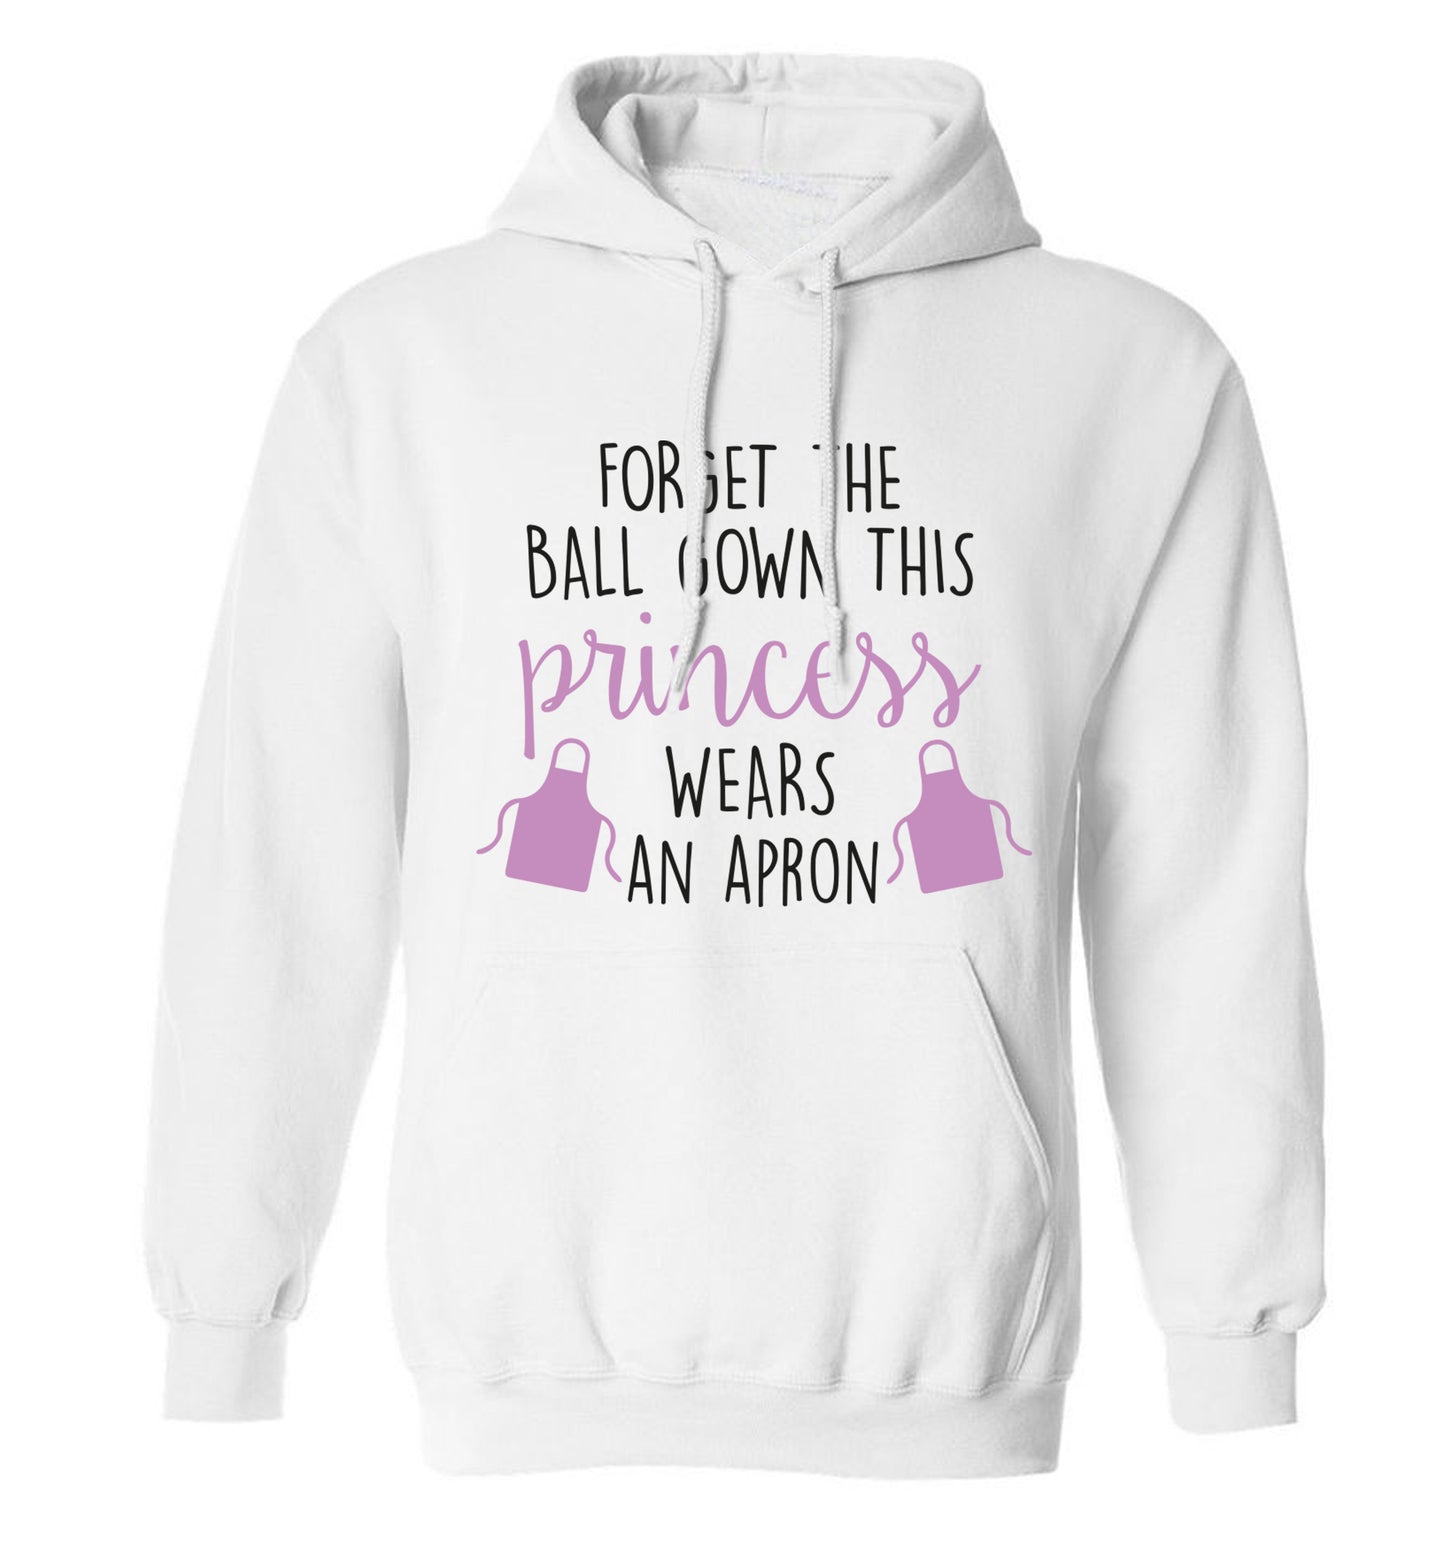 Forget the ball gown this princess wears an apron adults unisex white hoodie 2XL